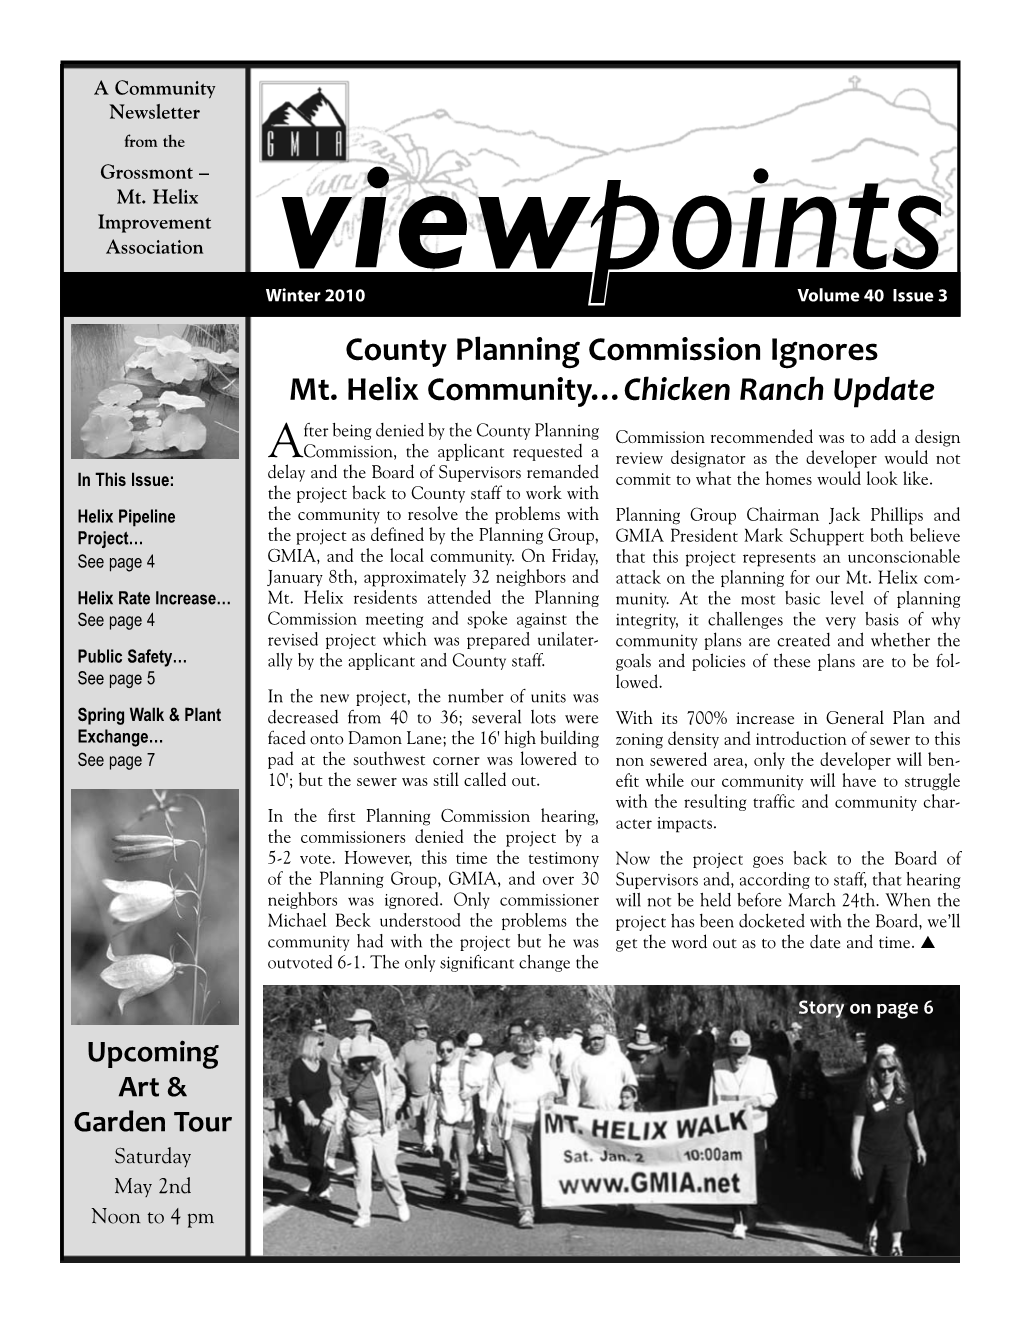 County Planning Commission Ignores Mt. Helix Community…Chicken Ranch Update